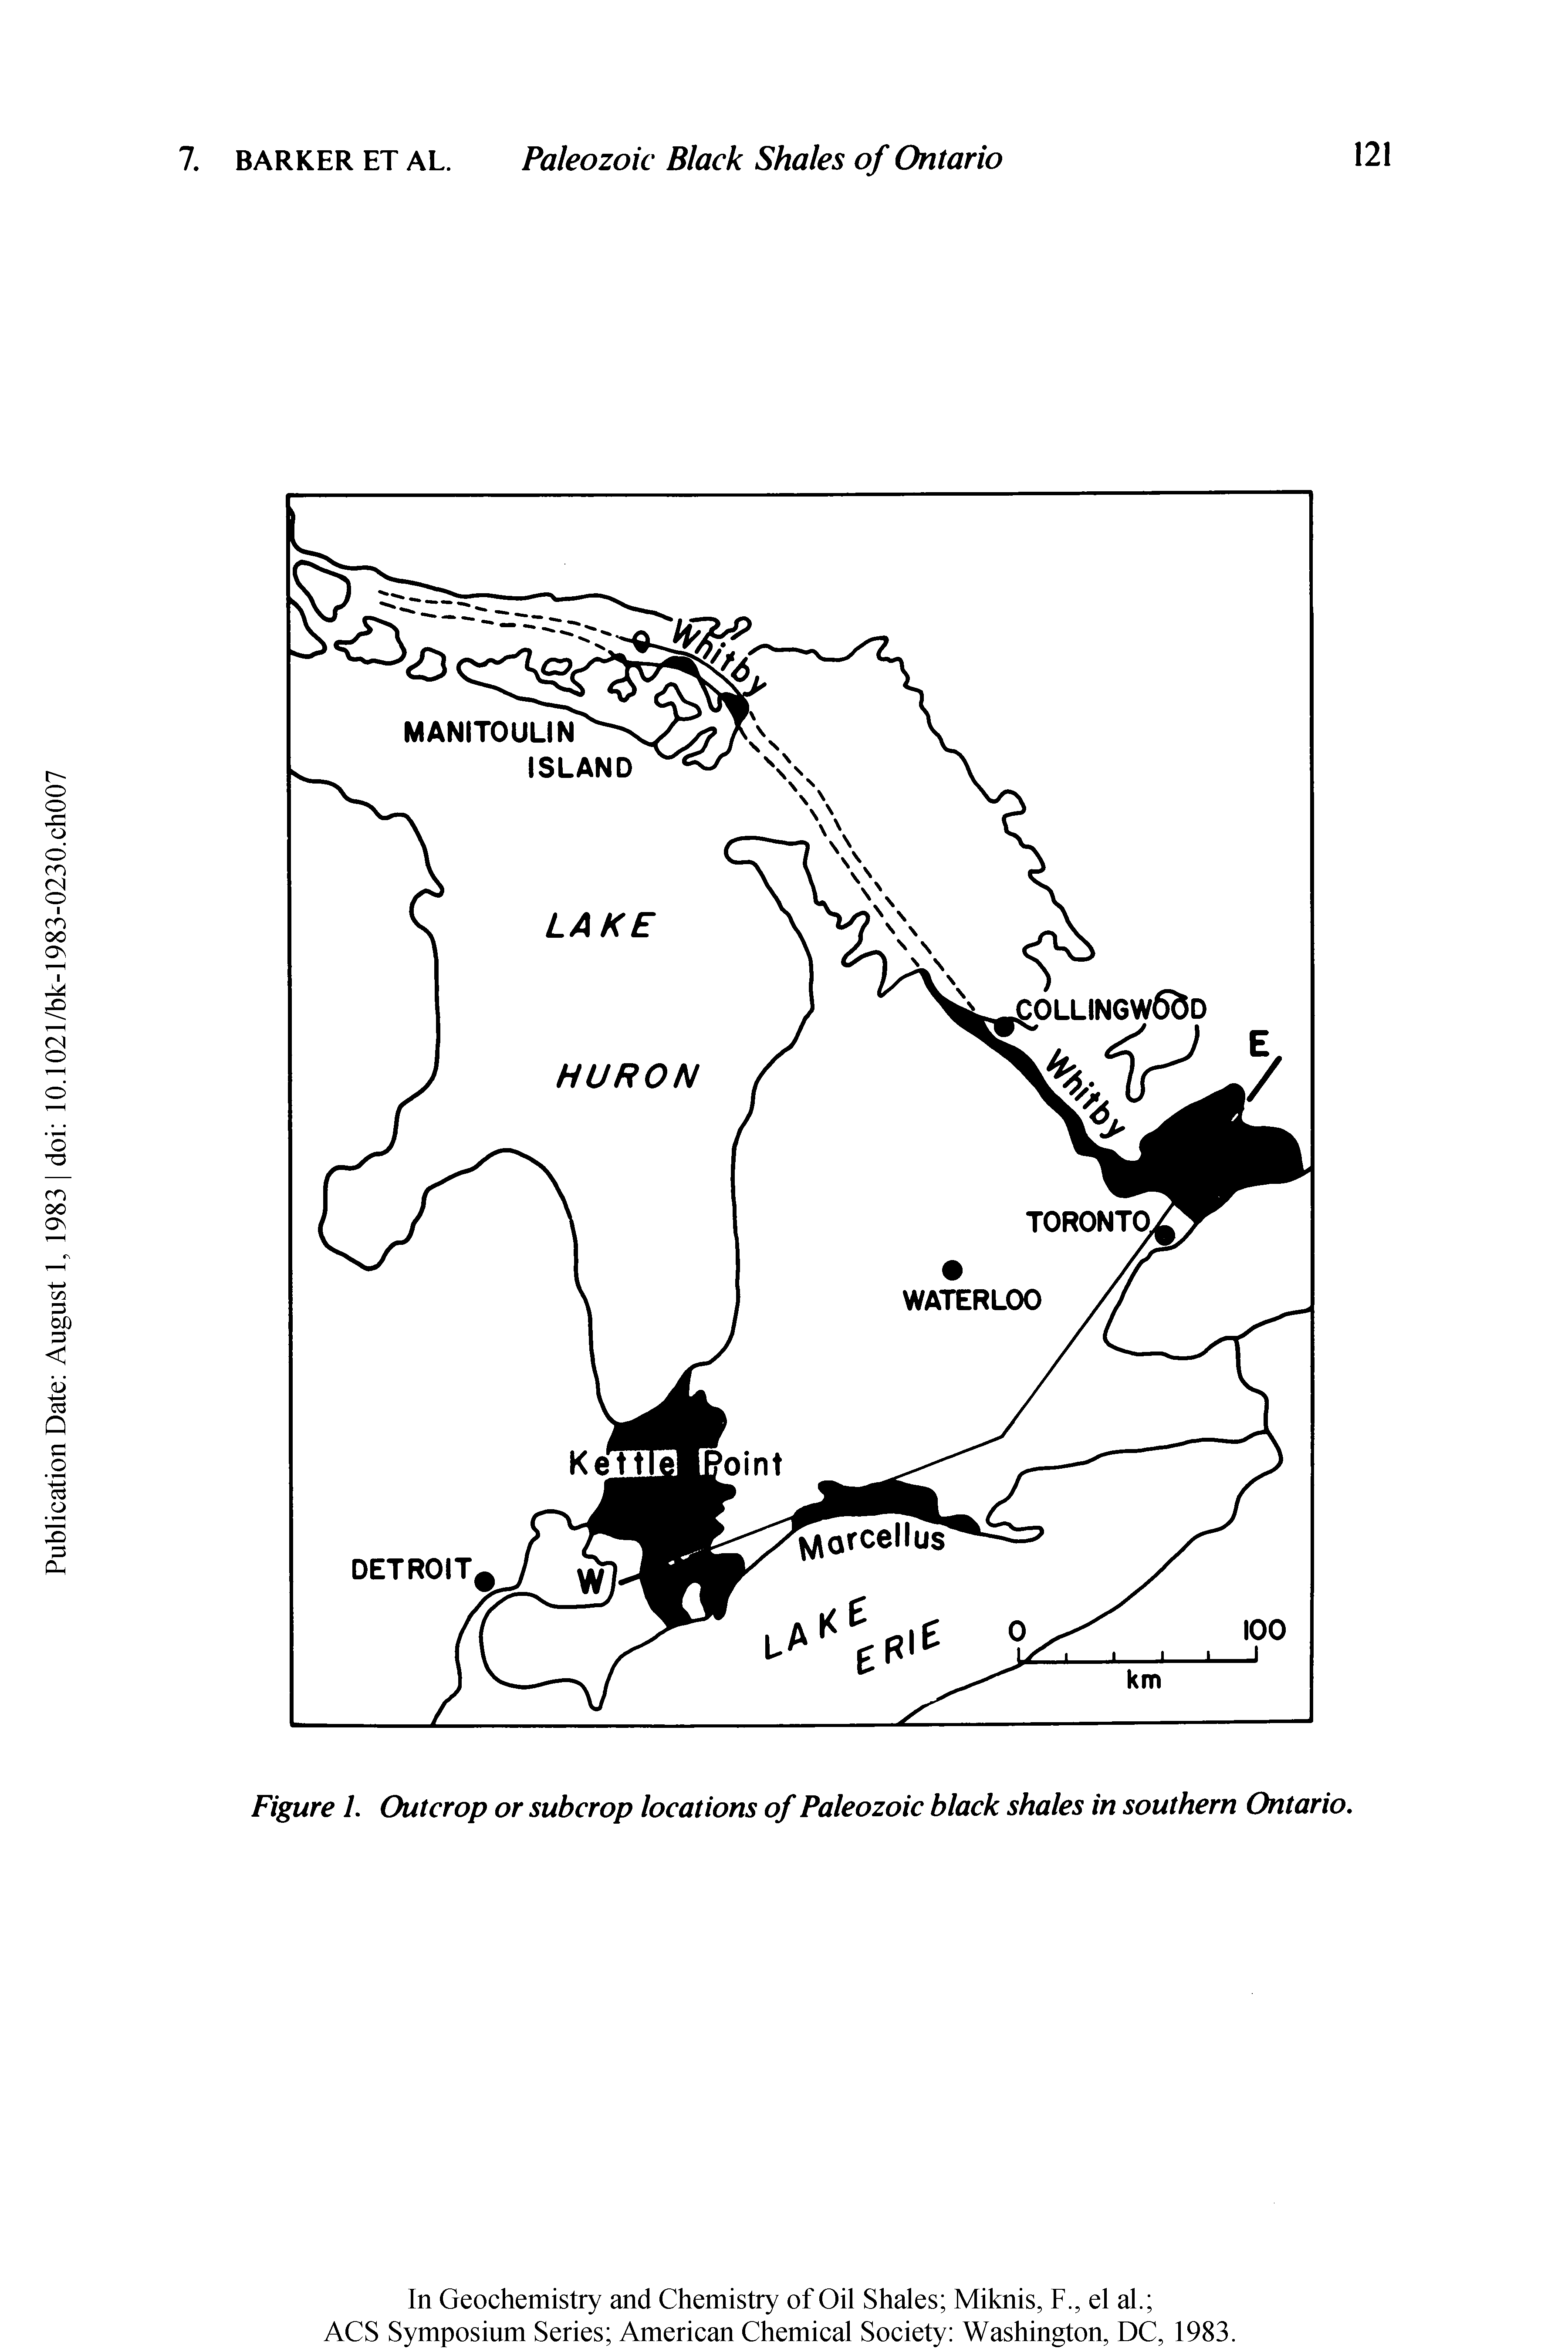 Figure 1. Outcrop or subcrop locations of Paleozoic black shales in southern Ontario.